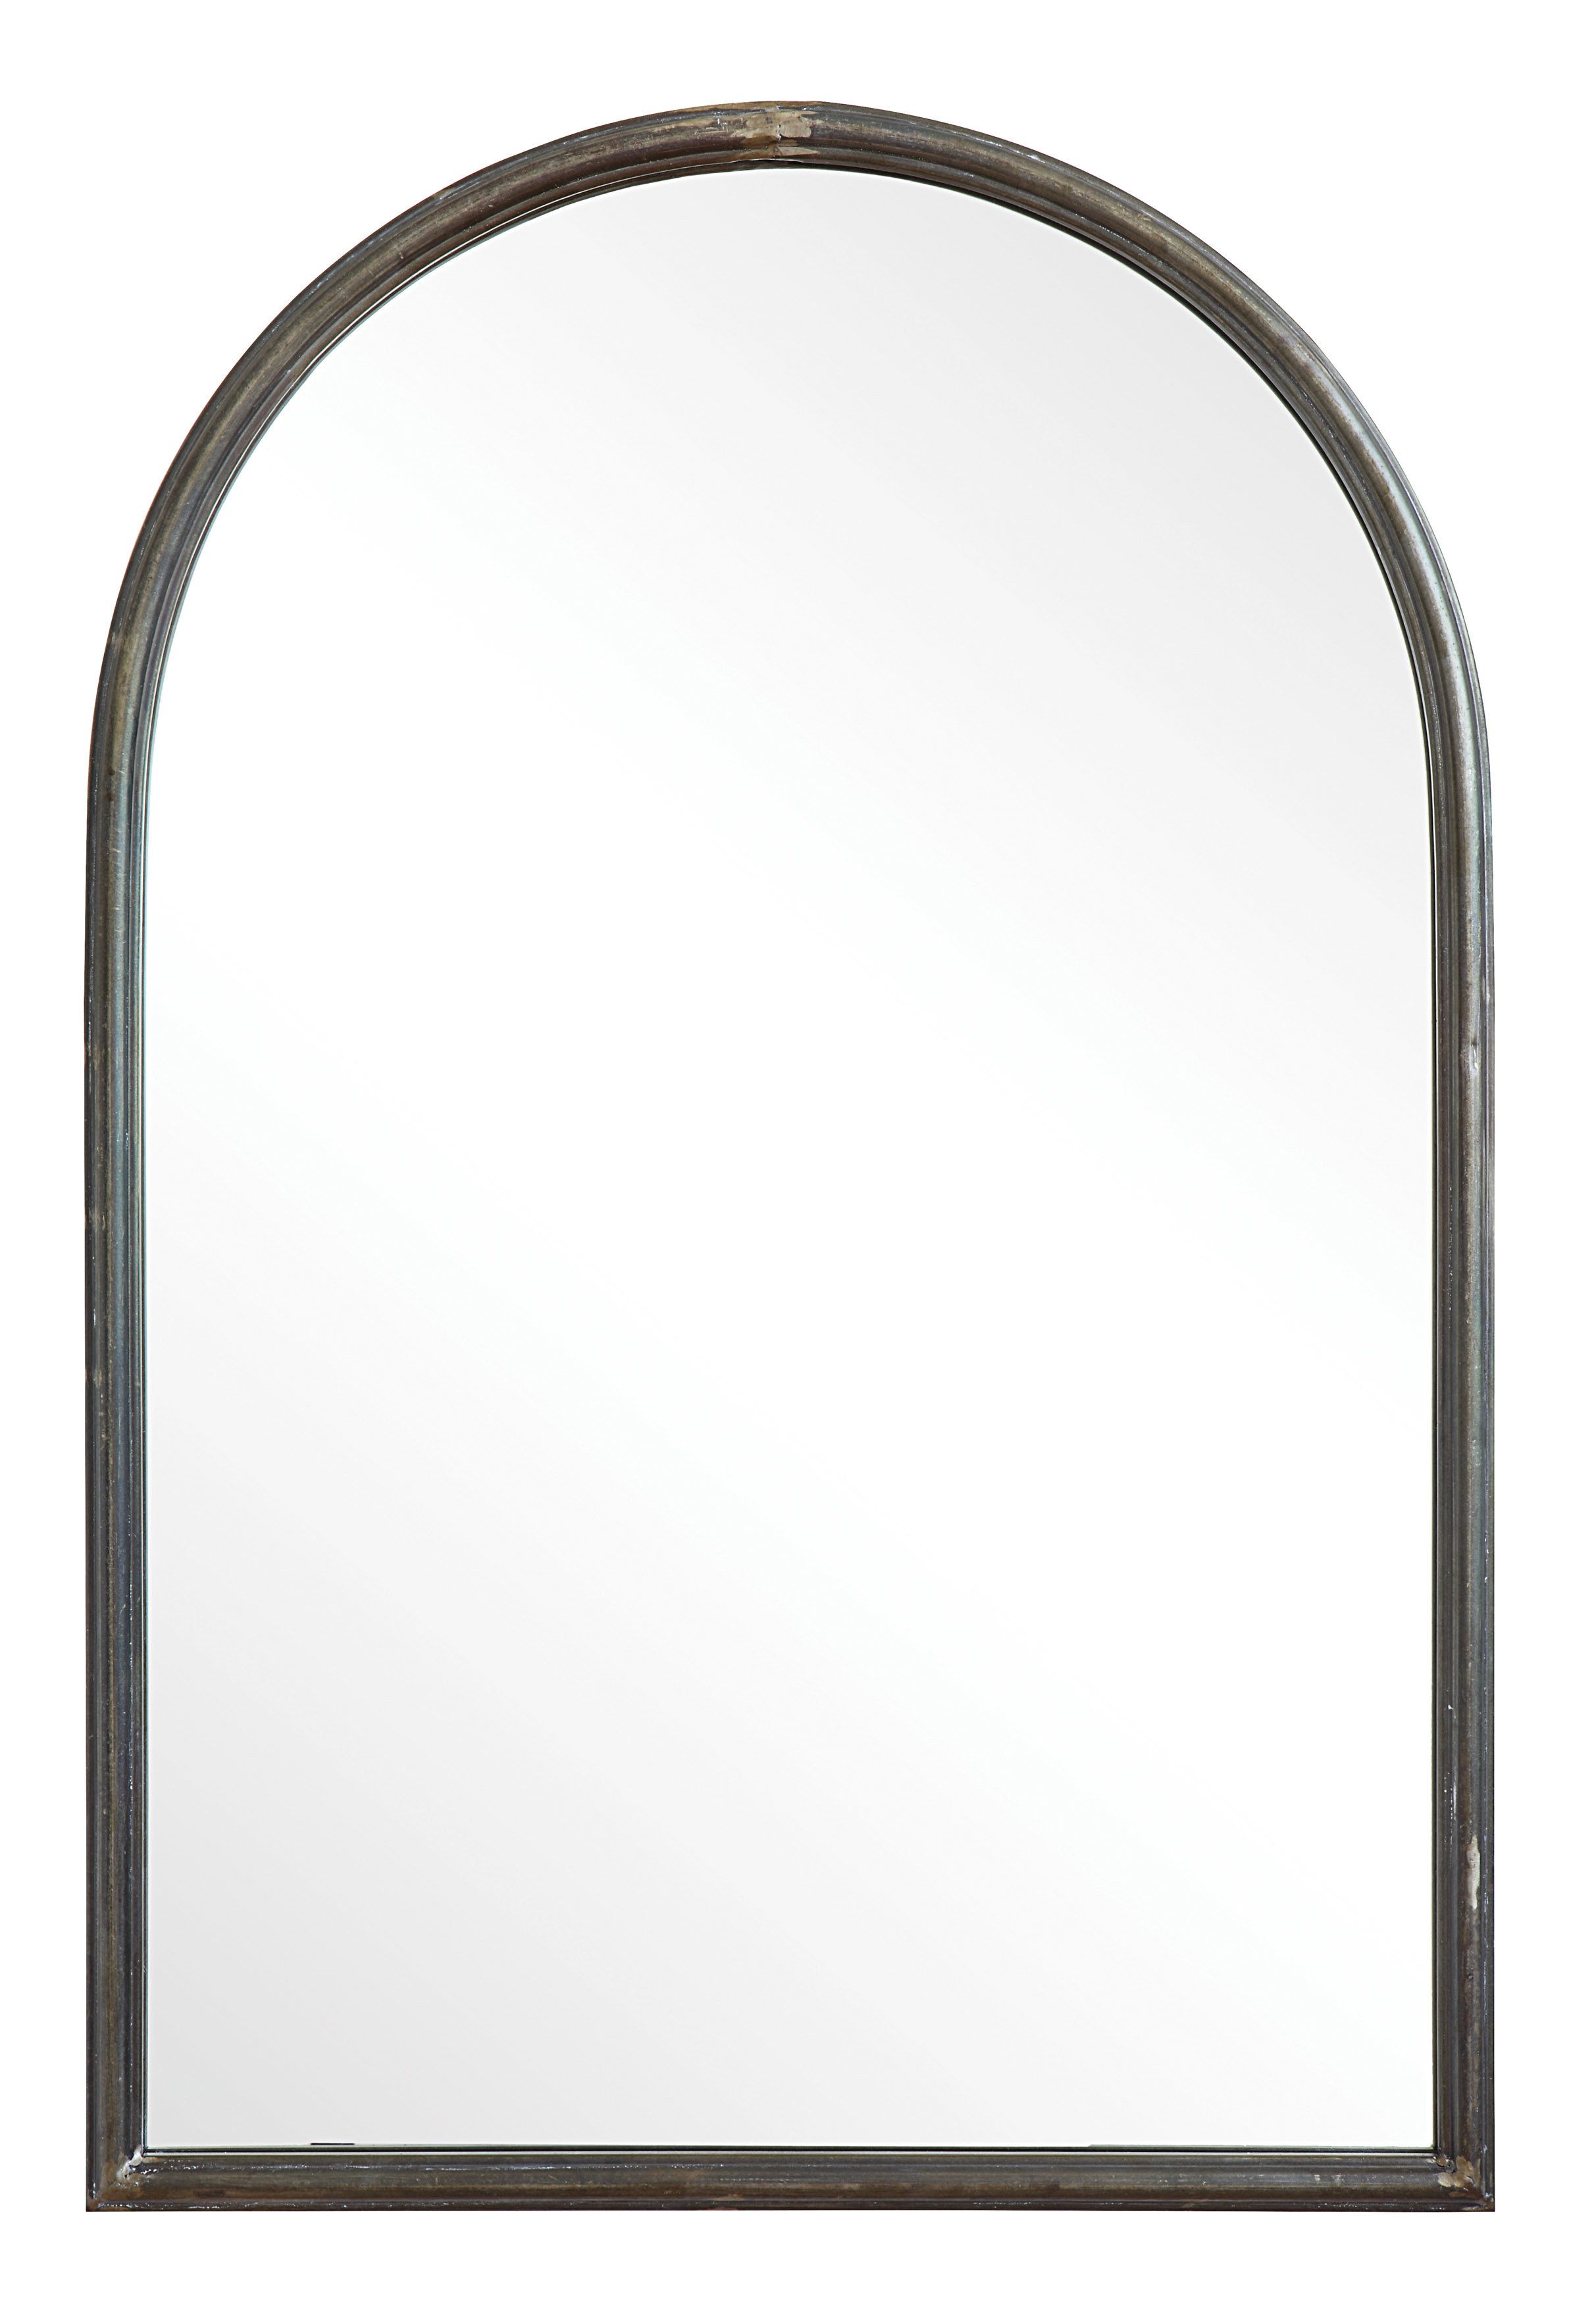 Arch & Crowned Top Wall Mounted Mirrors You'll Love In 2019 Throughout Fifi Contemporary Arch Wall Mirrors (View 7 of 30)